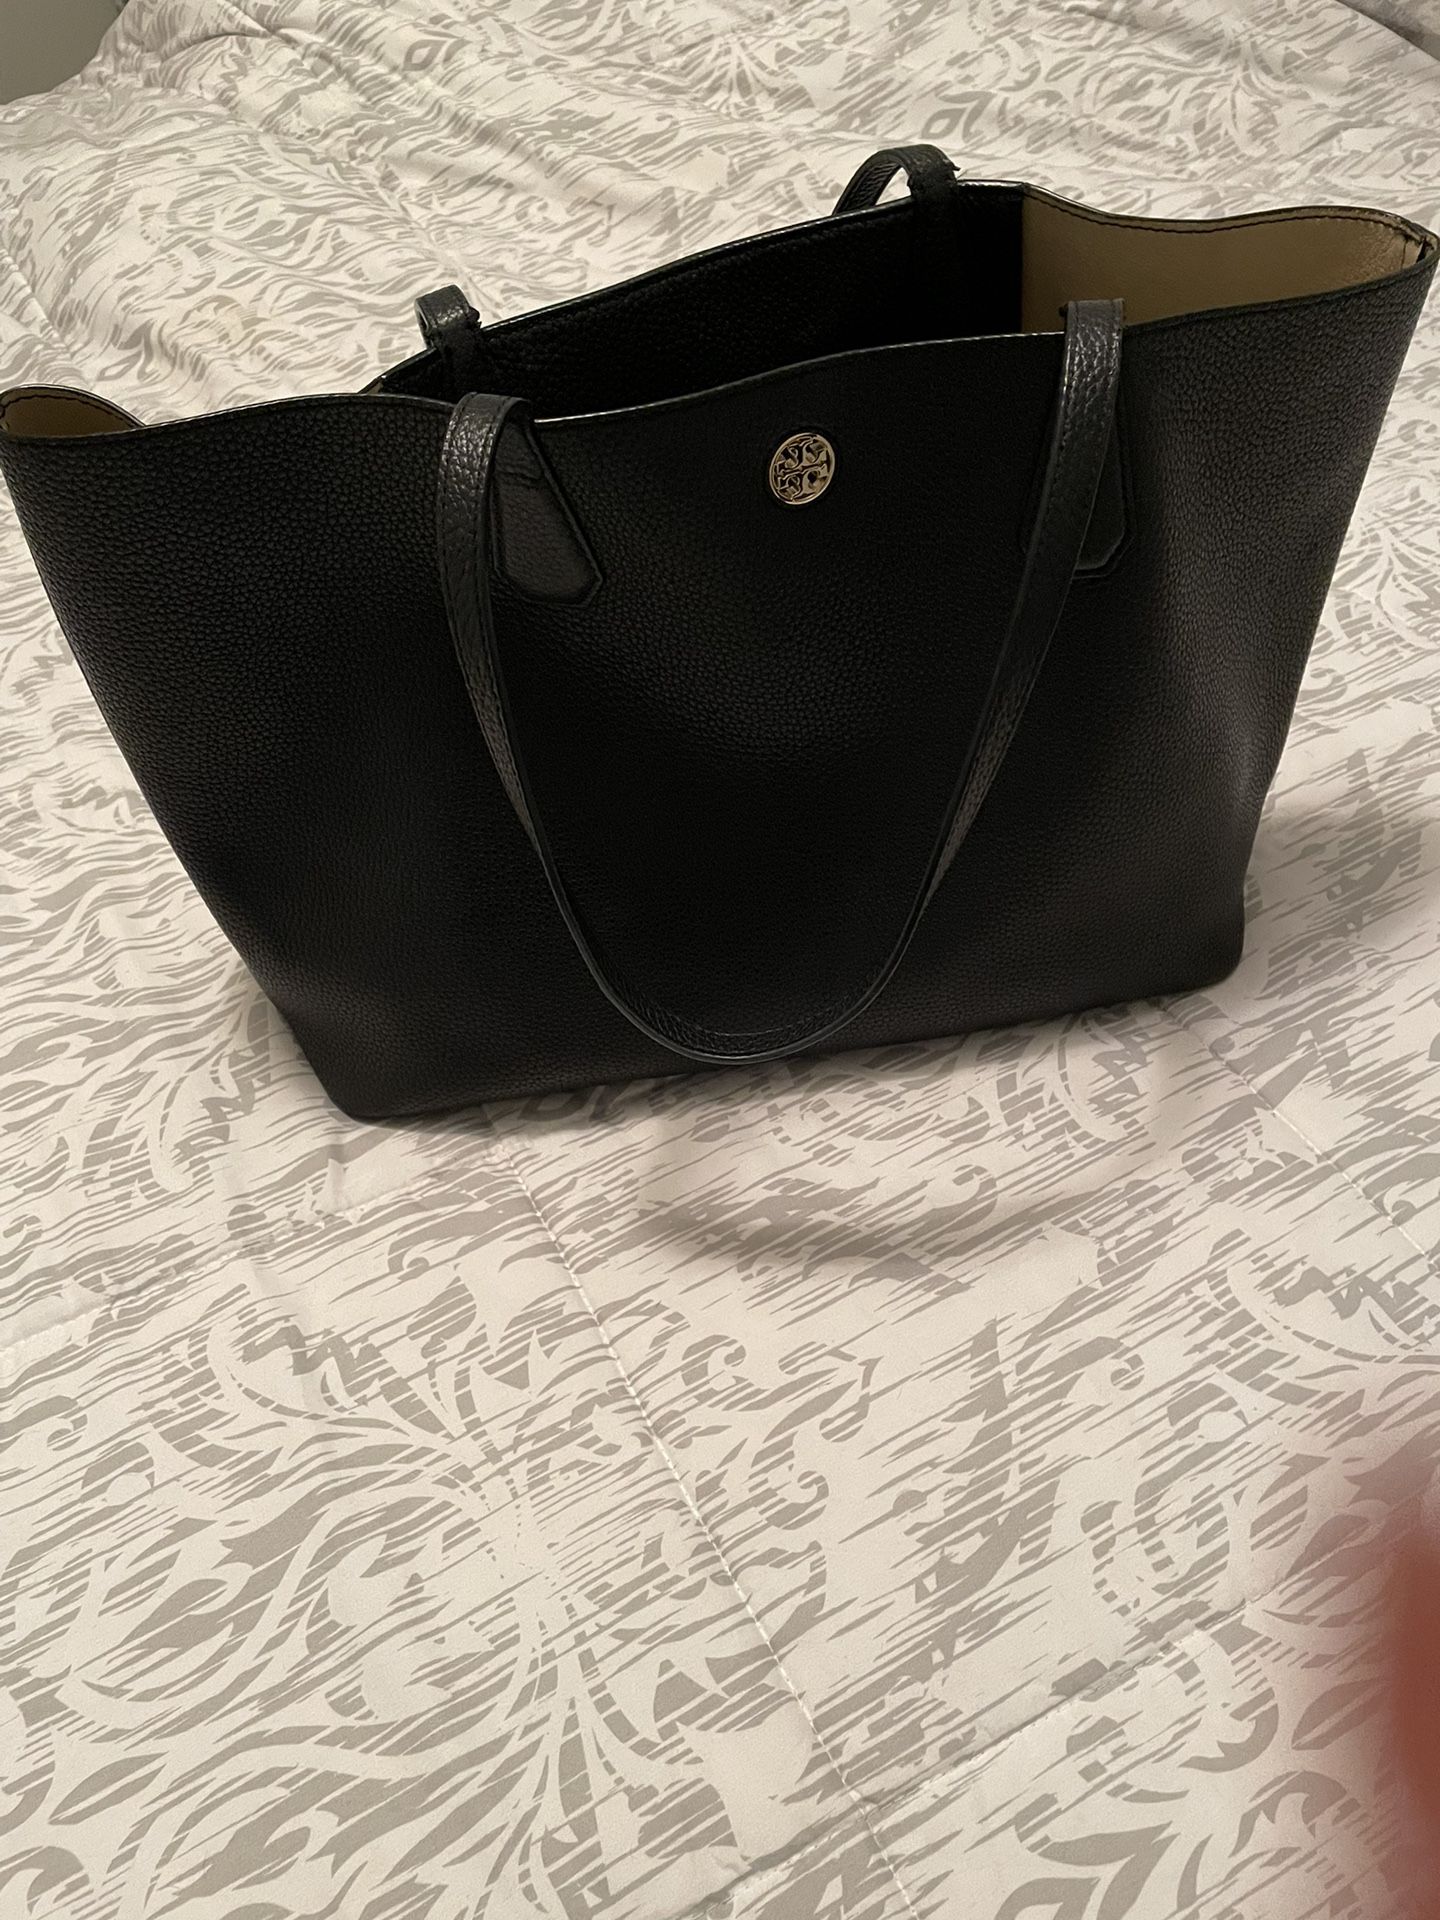 Tory Burch Perry Brody Tote Bag for Sale in Orlando, FL - OfferUp